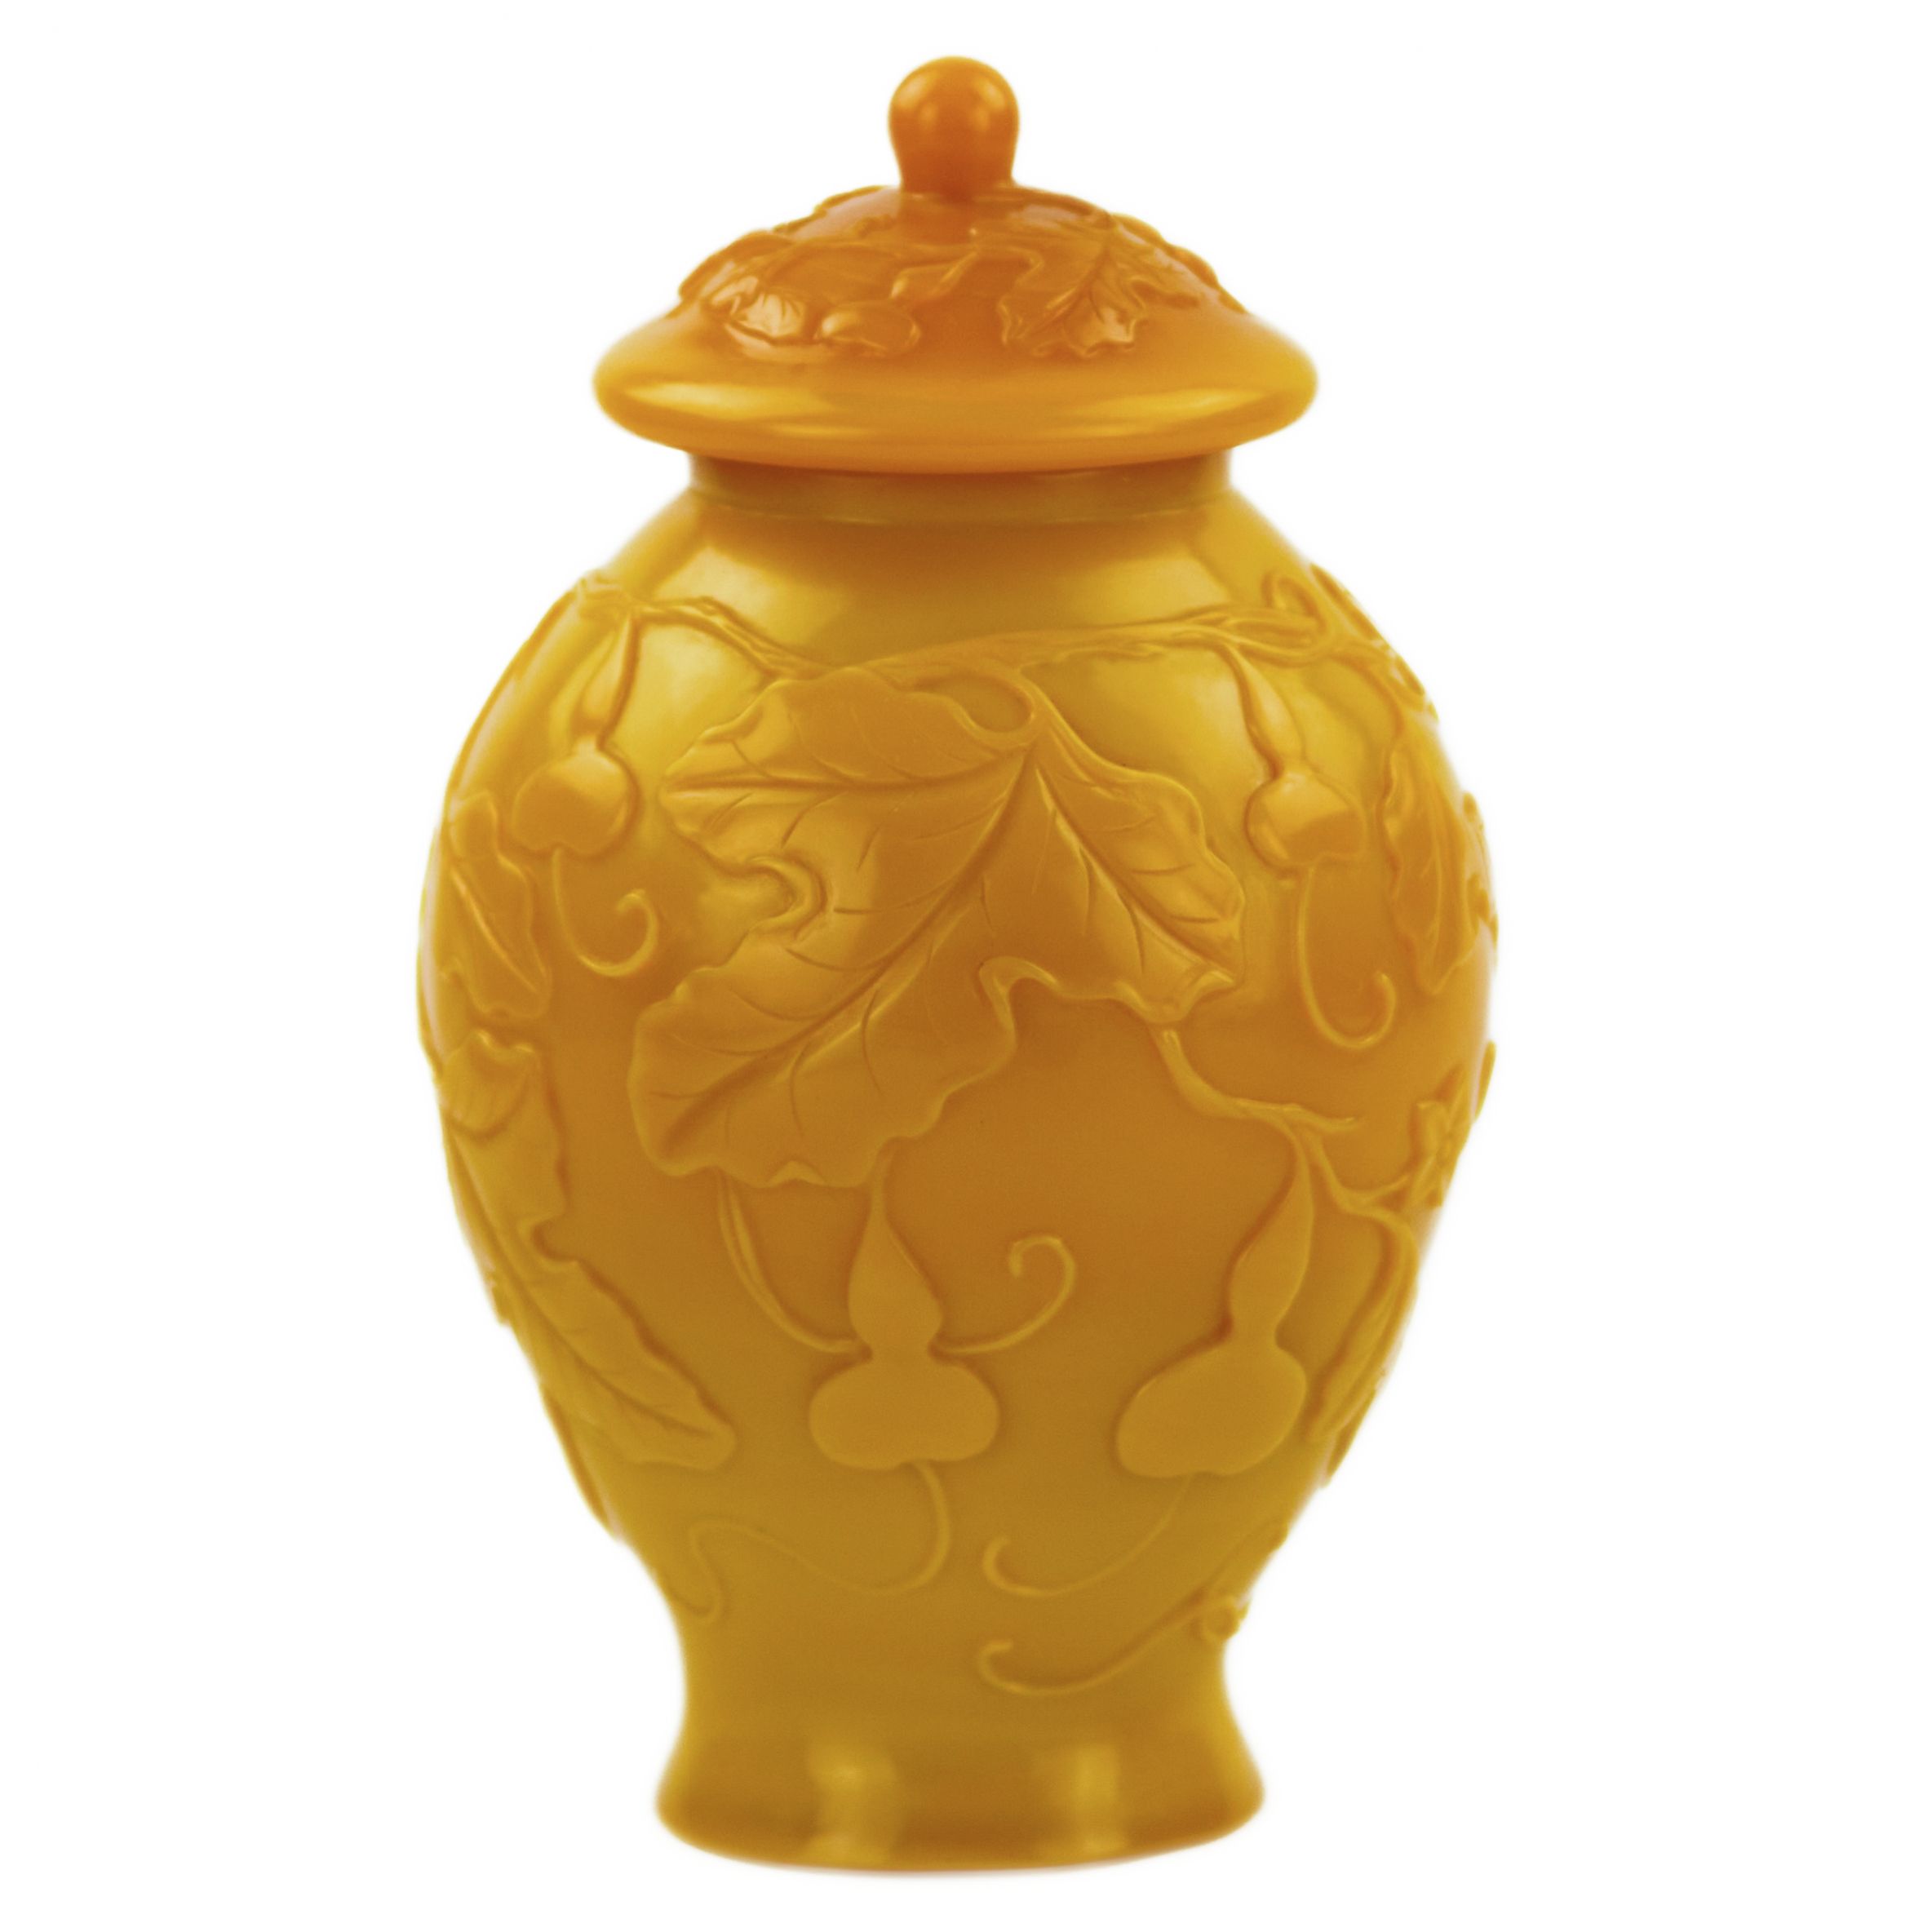 Chinese yellow Beijing glass urn vase from the 19th century. 